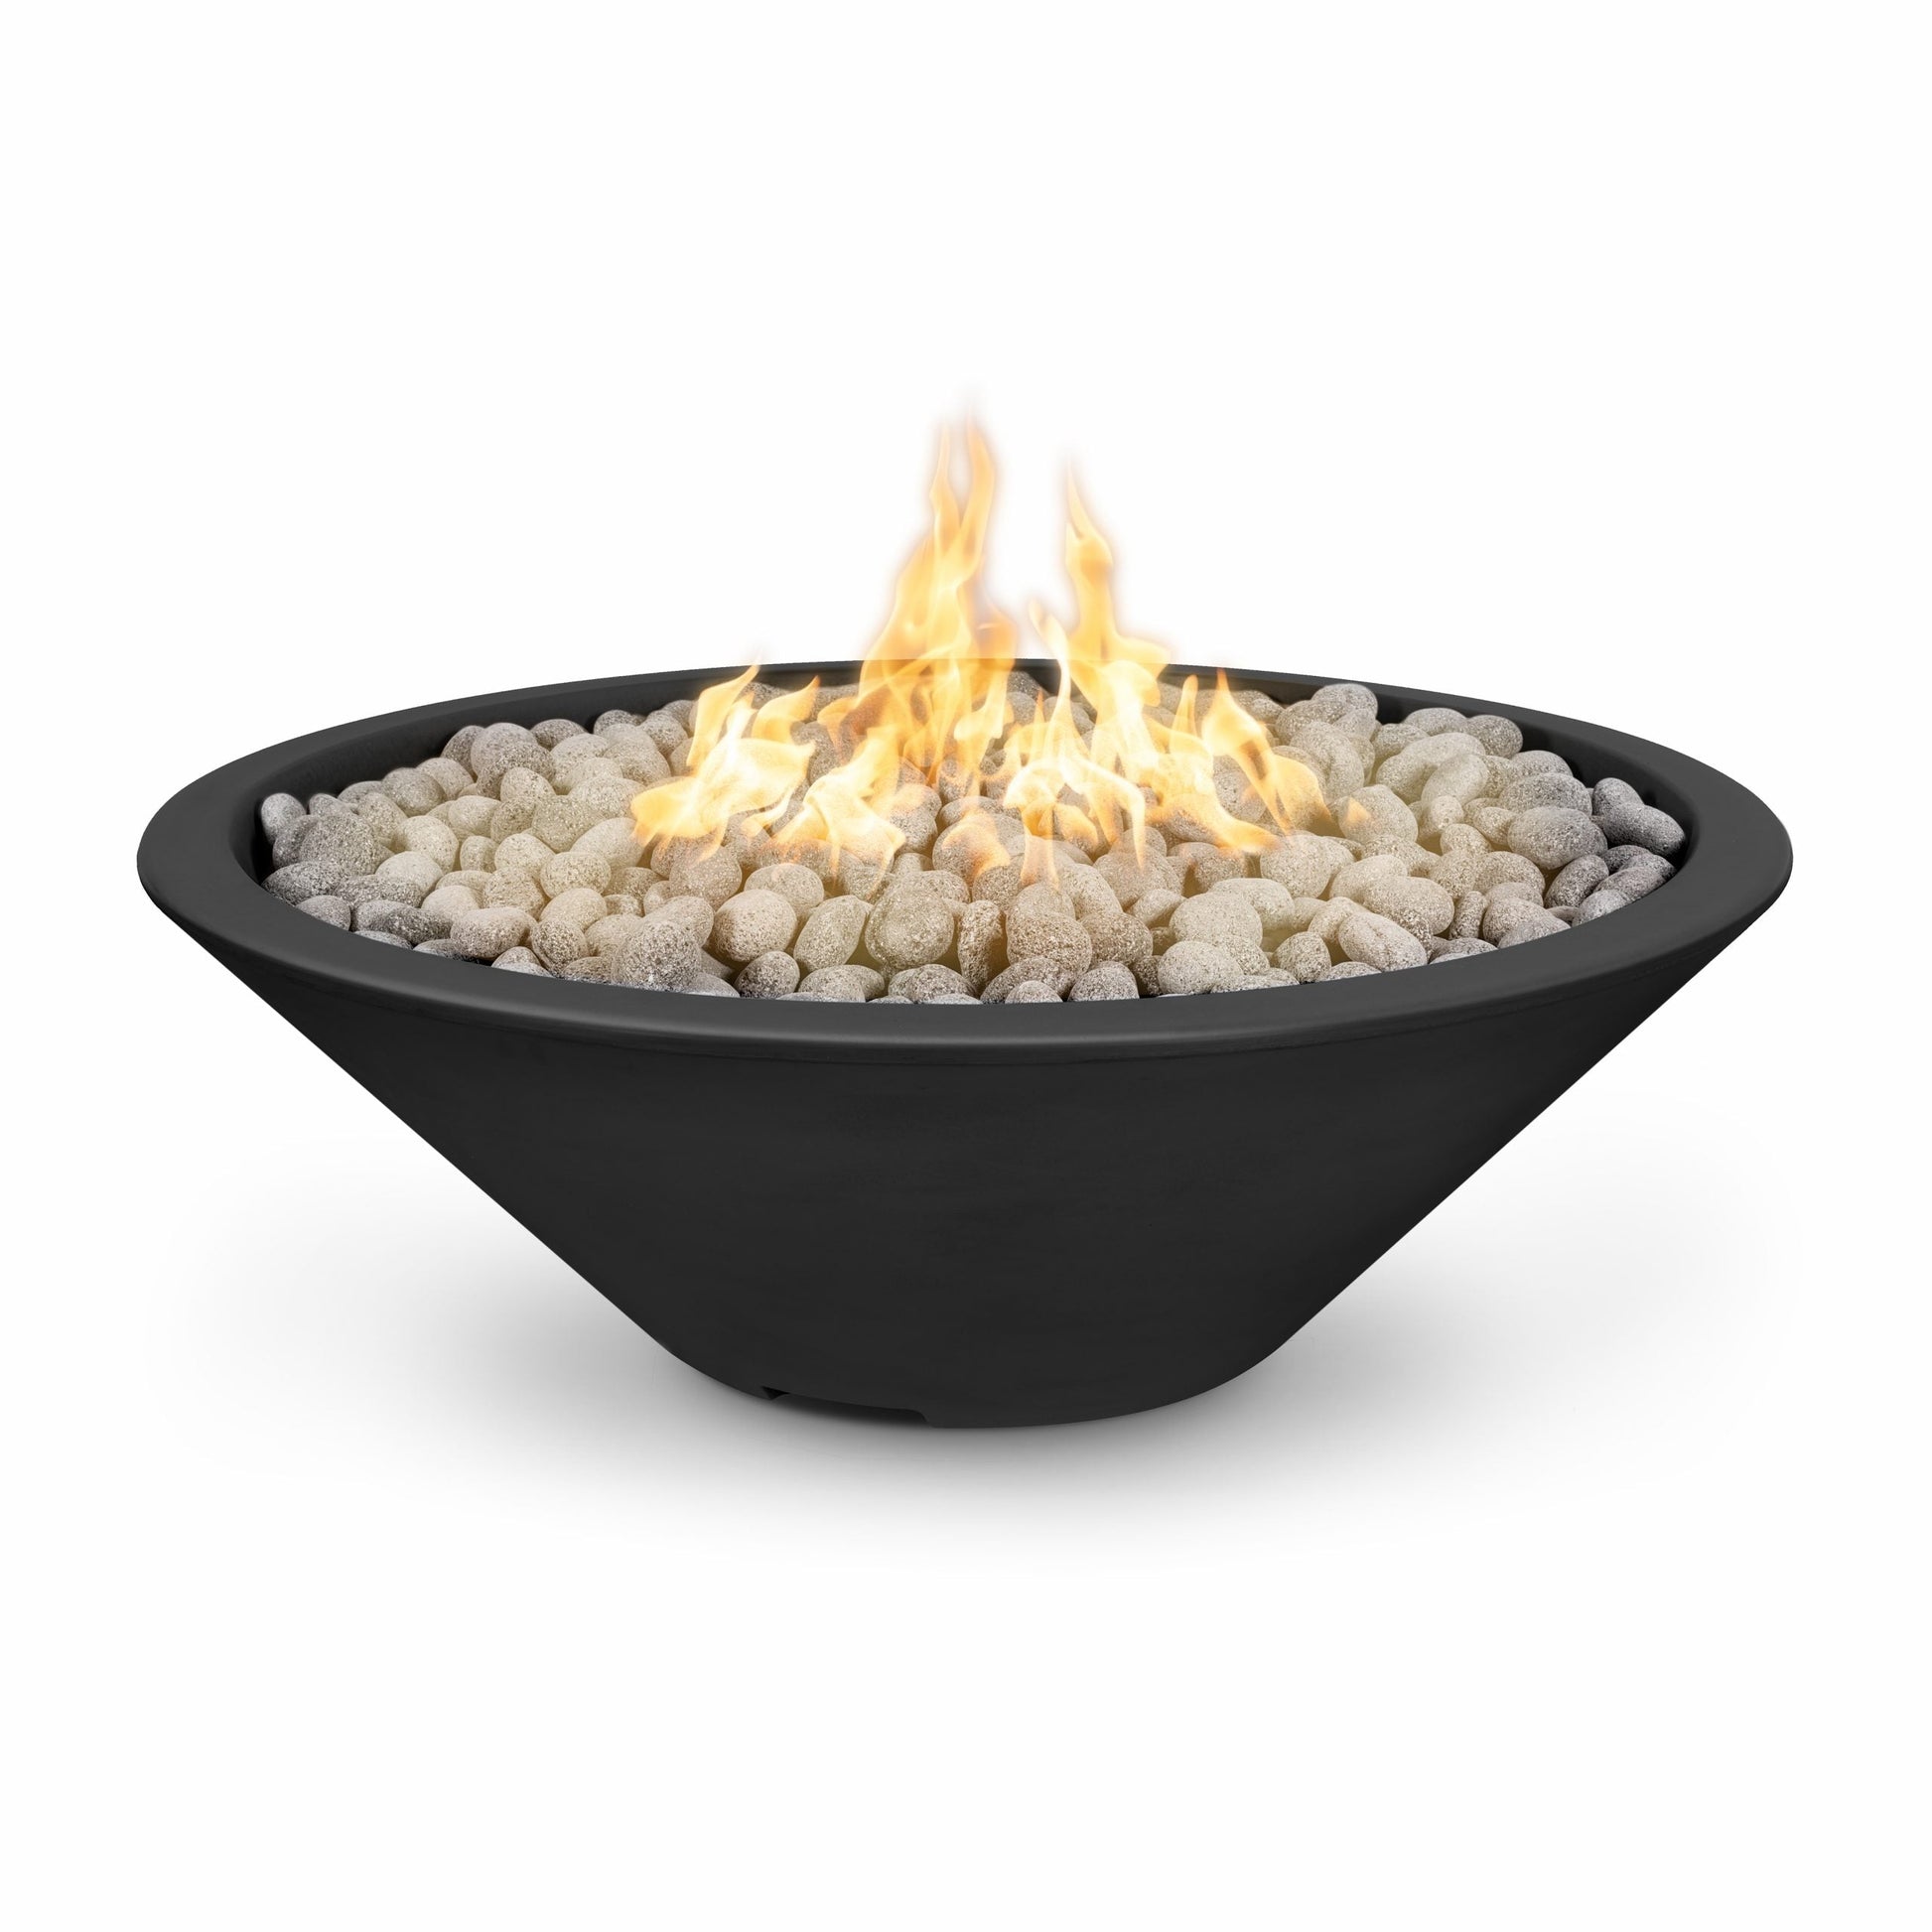 The Outdoor Plus Round Cazo 48" Pewter Powder Coated Metal Liquid Propane Fire Pit with 110V Electronic Ignition